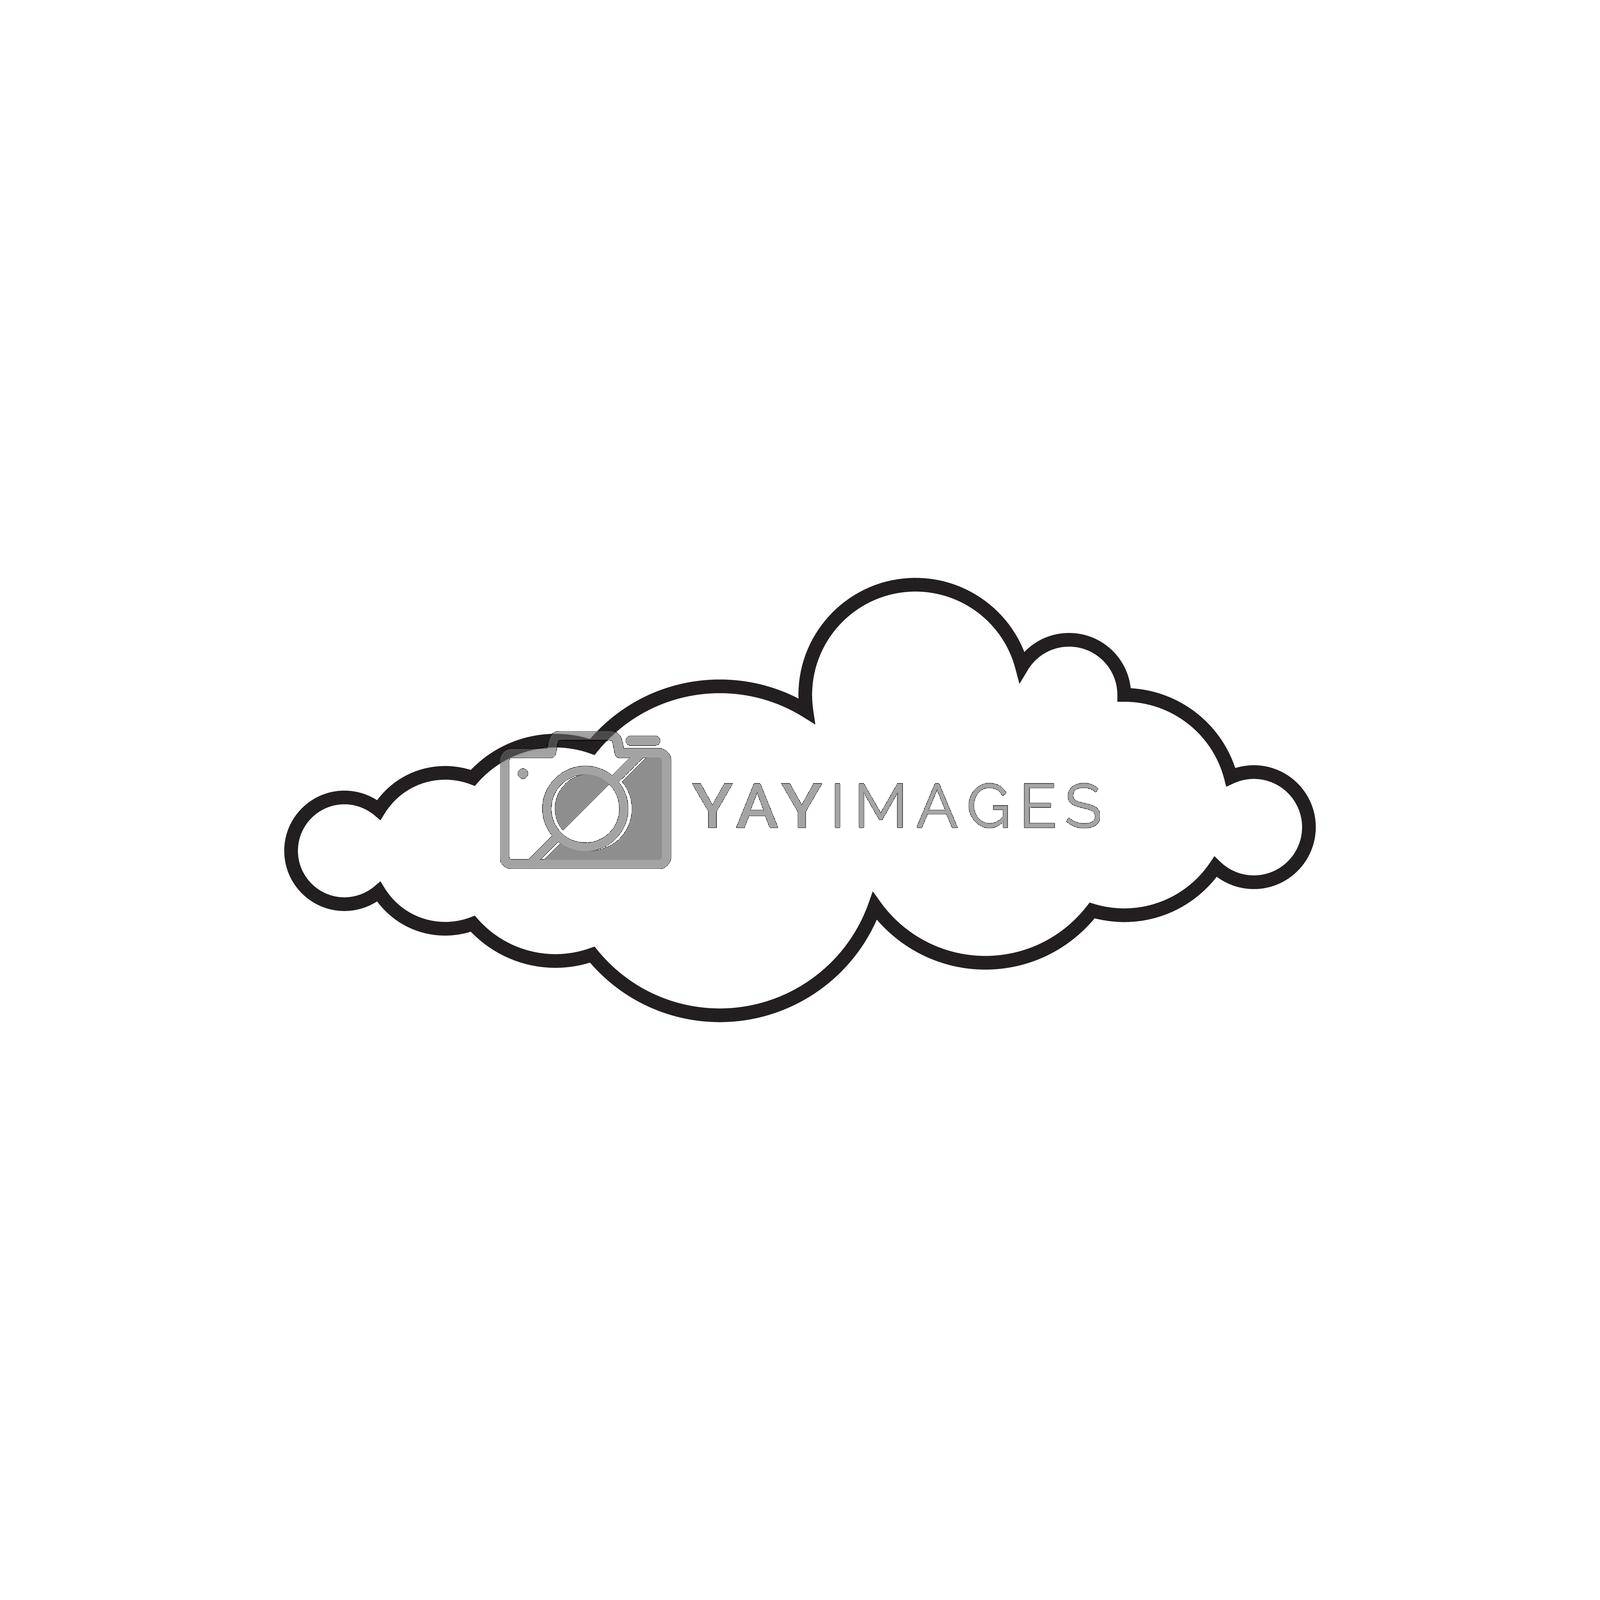 Royalty free image of Cloud line icon by awk